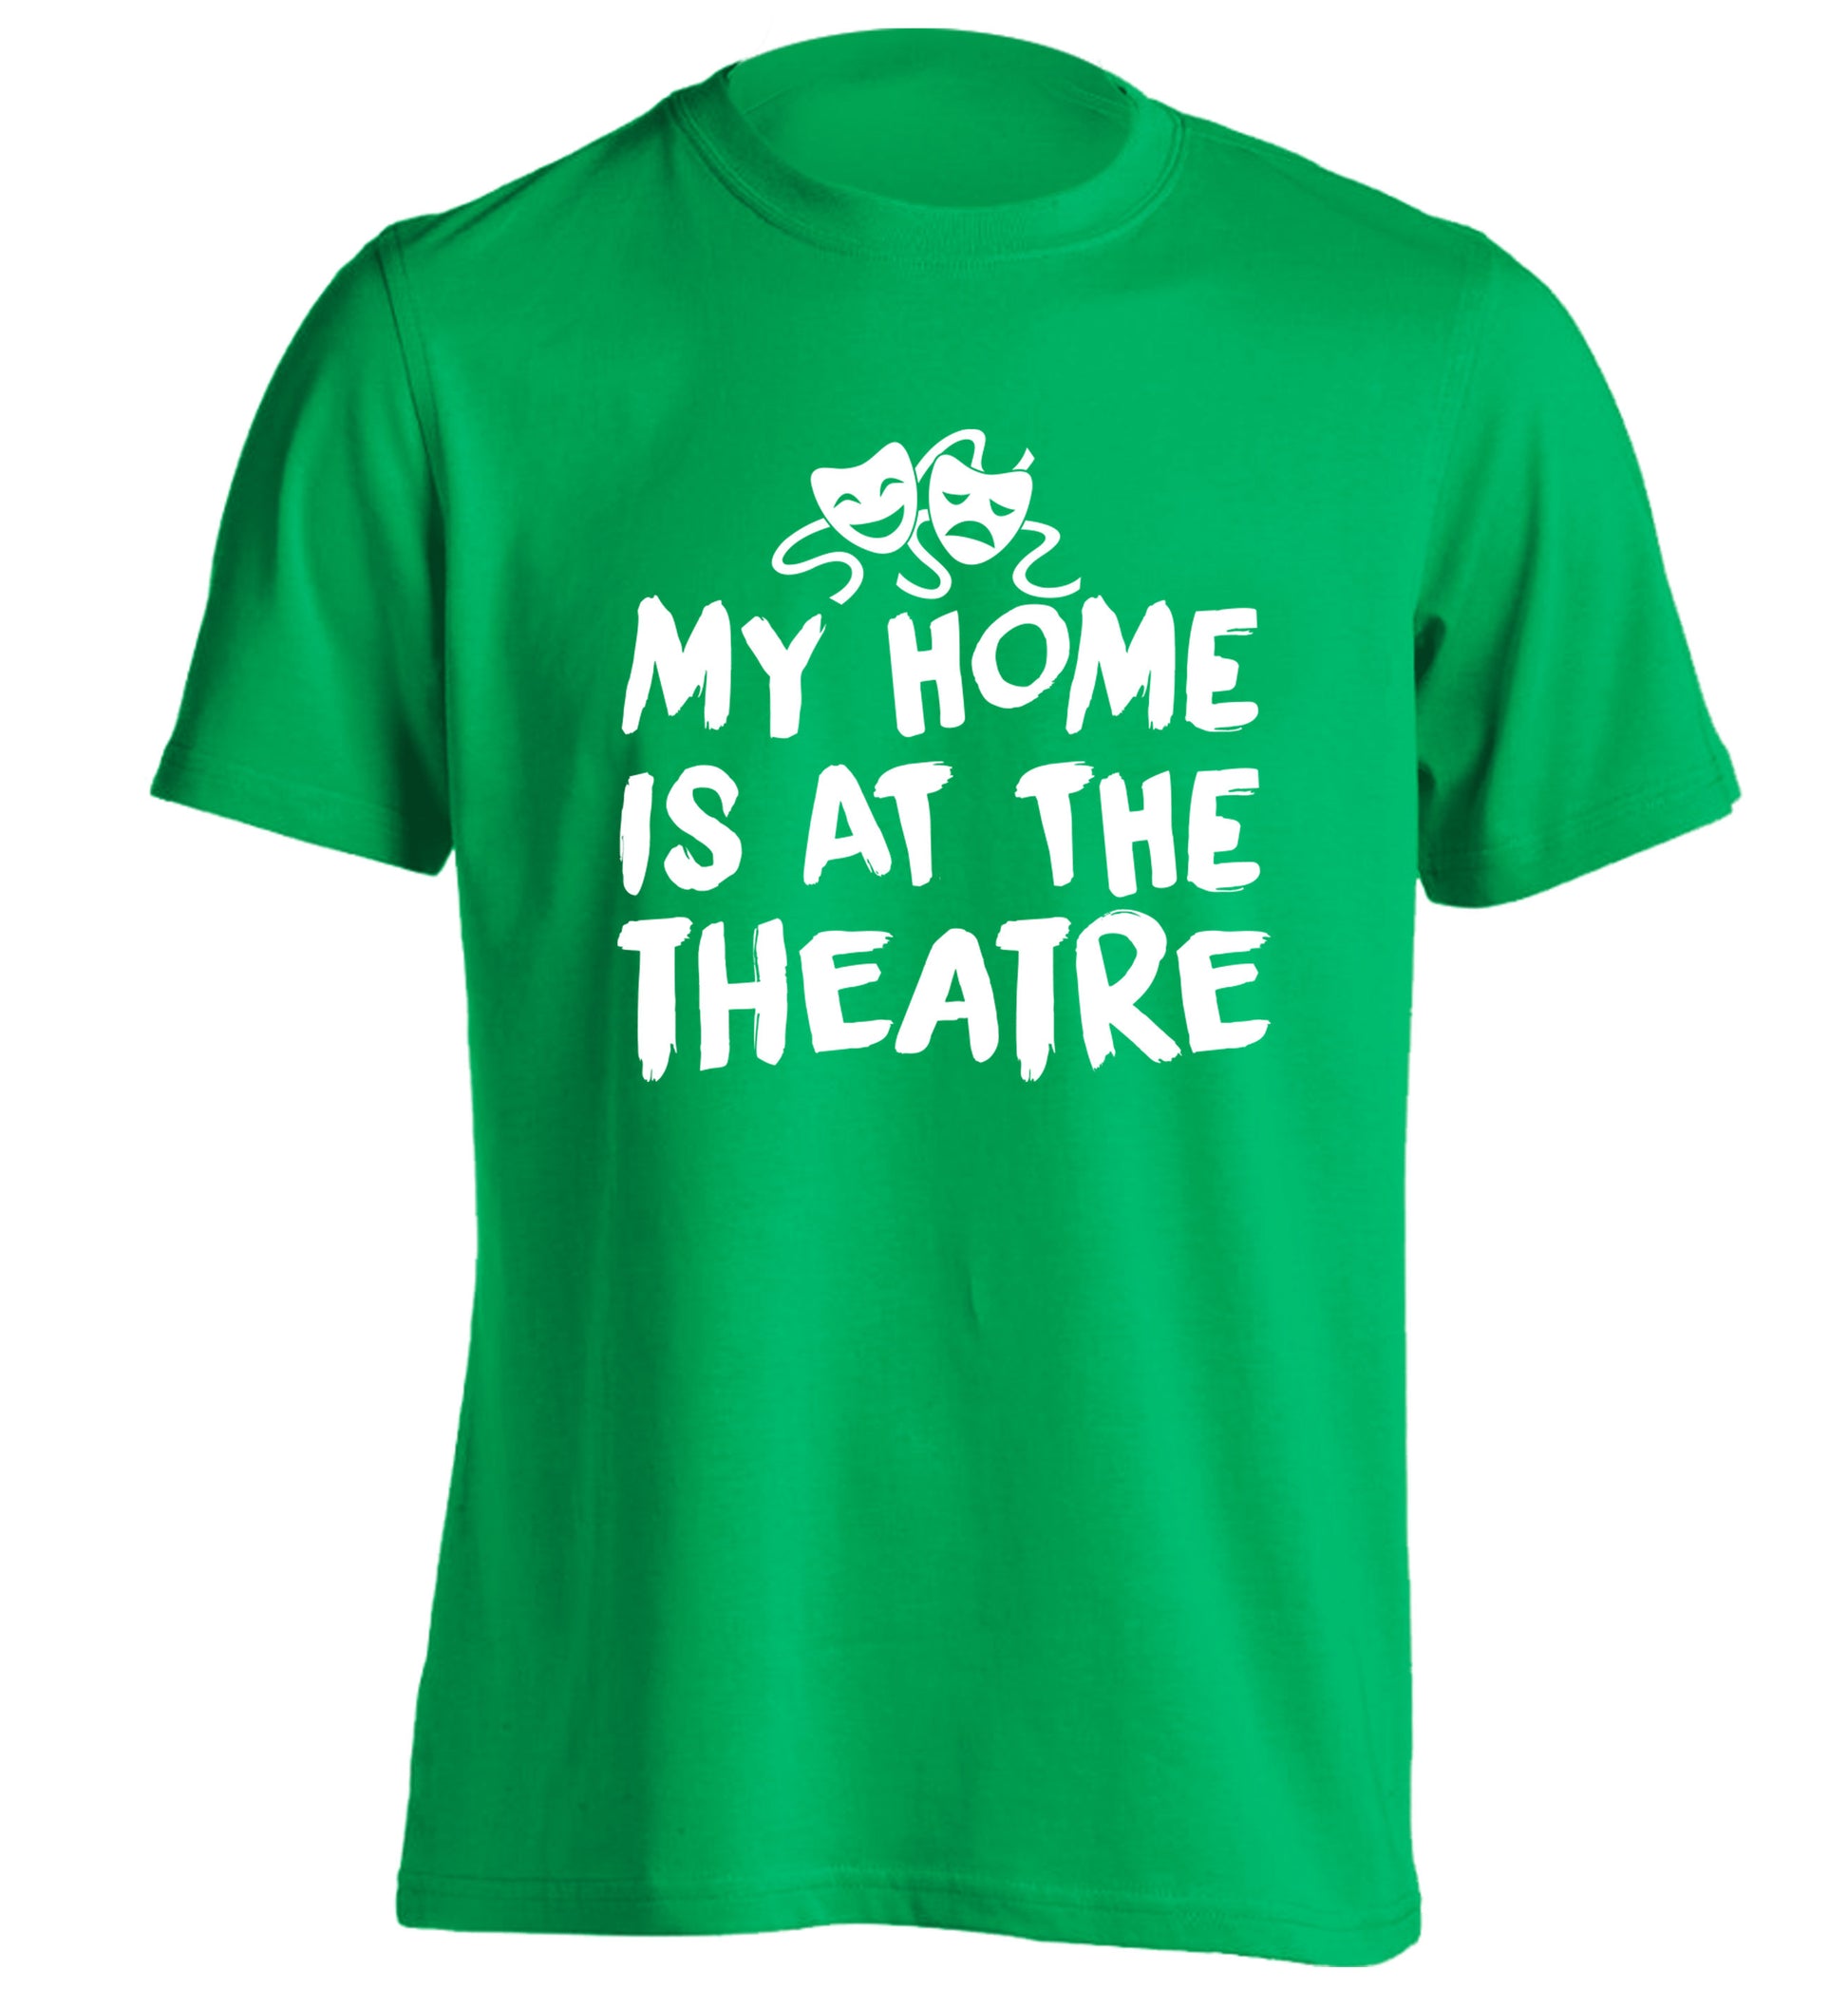 My home is at the theatre adults unisex green Tshirt 2XL